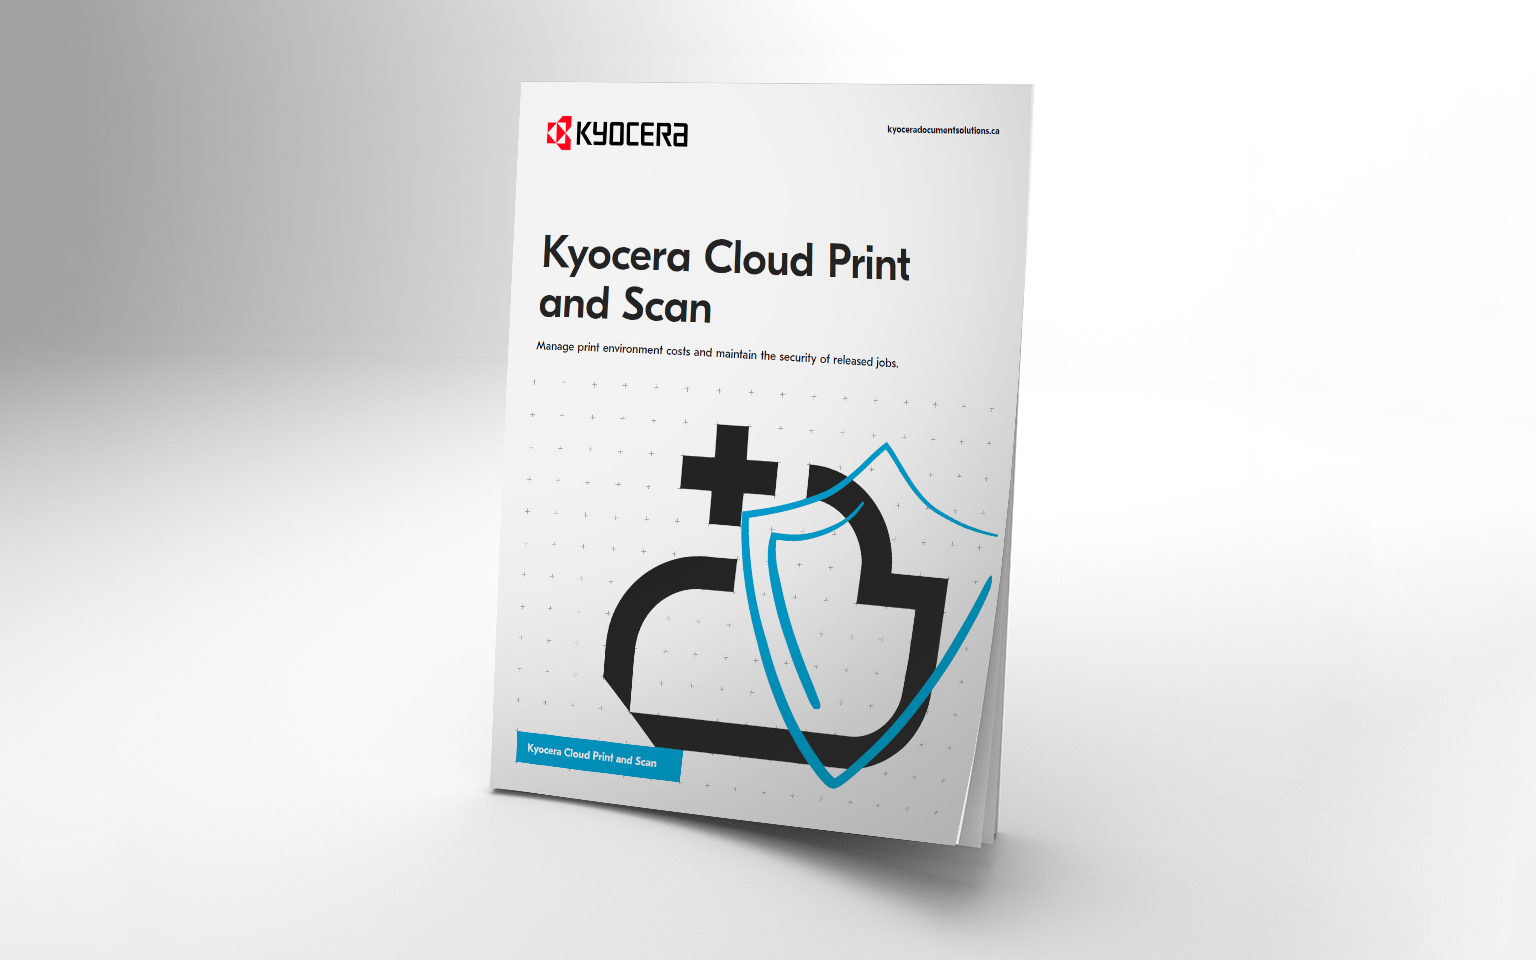 Download our print management guide | Kyocera